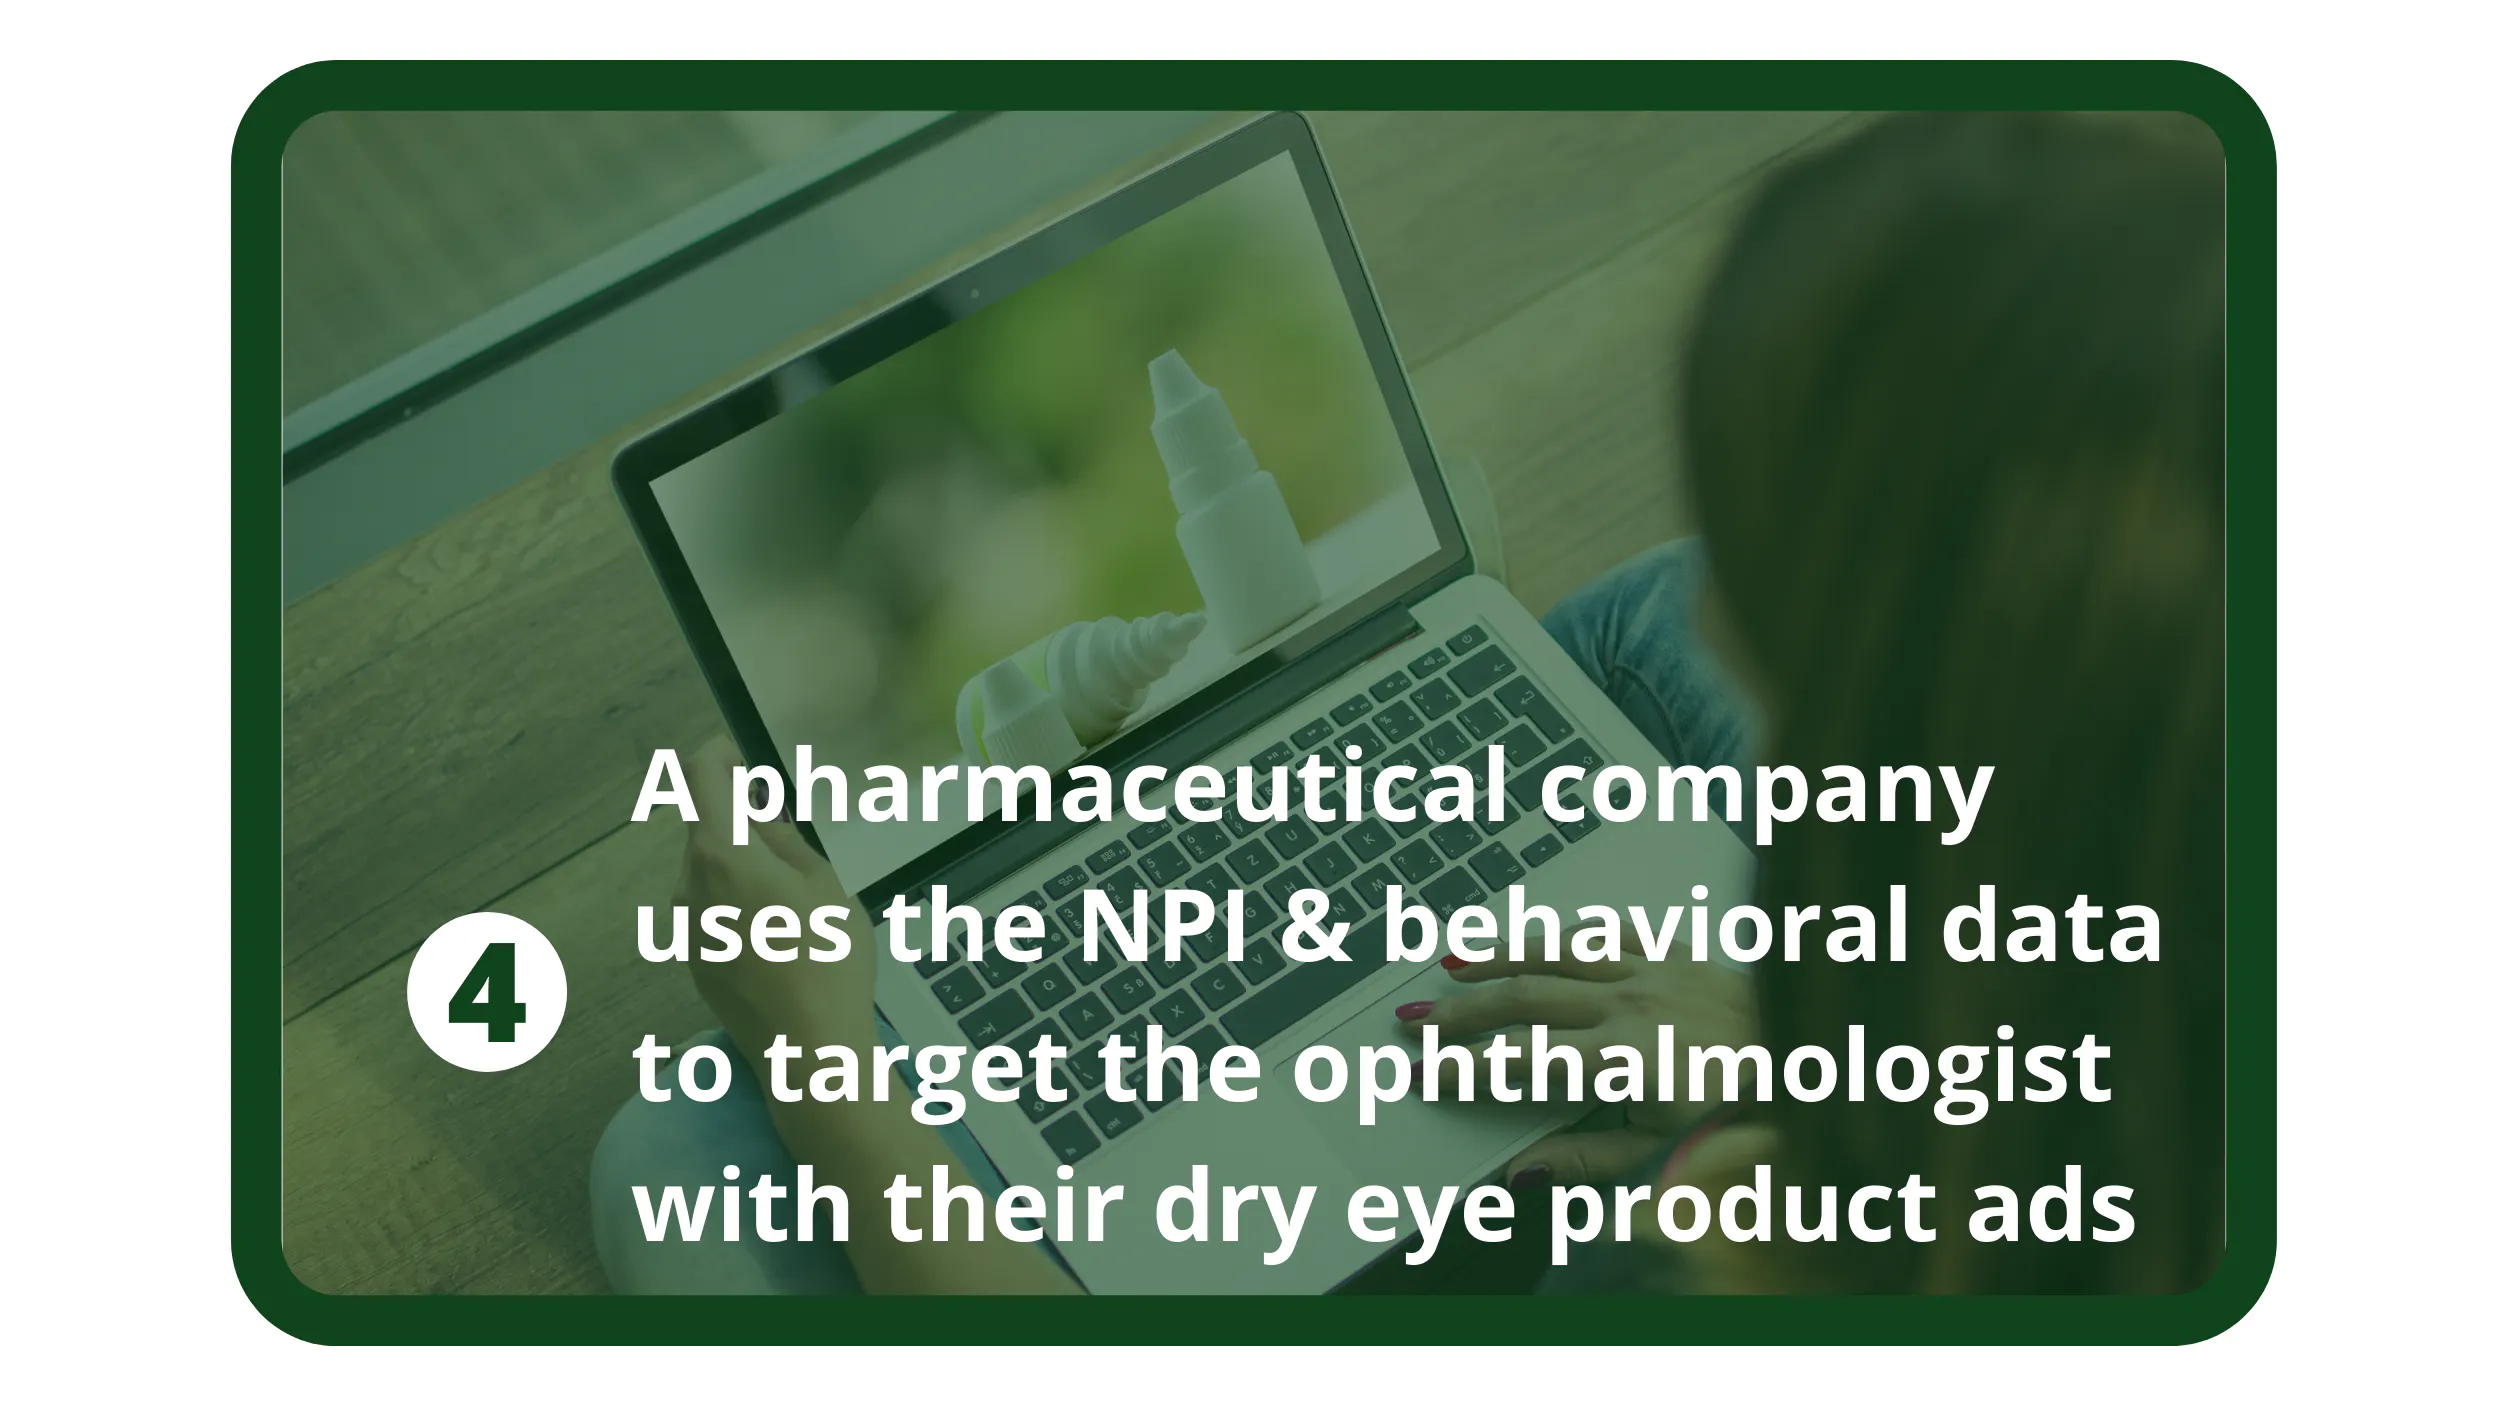 A pharma company uses the NPI and behavioral data to target the ophthalmologist with dry eye product ads